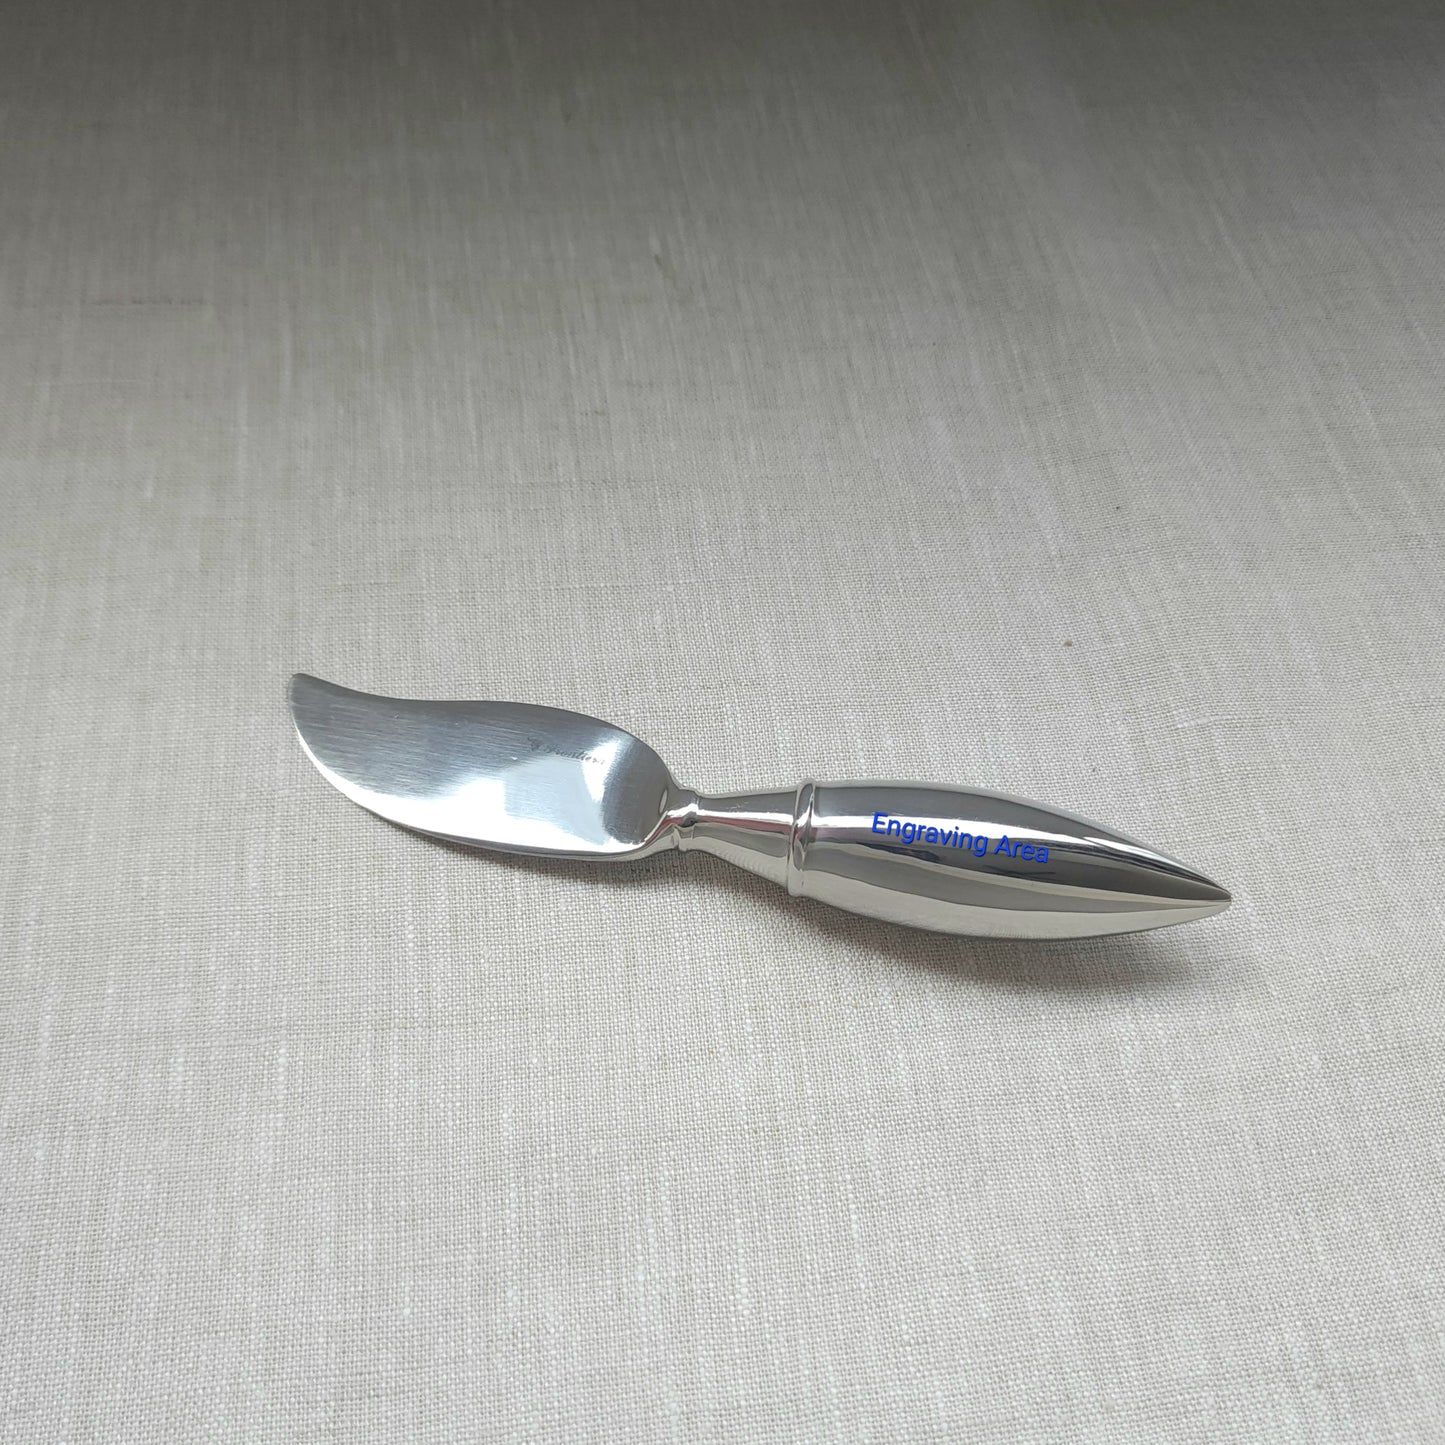 Gorgeous classic mini butter knife 154mm + Free Name Engraving Service